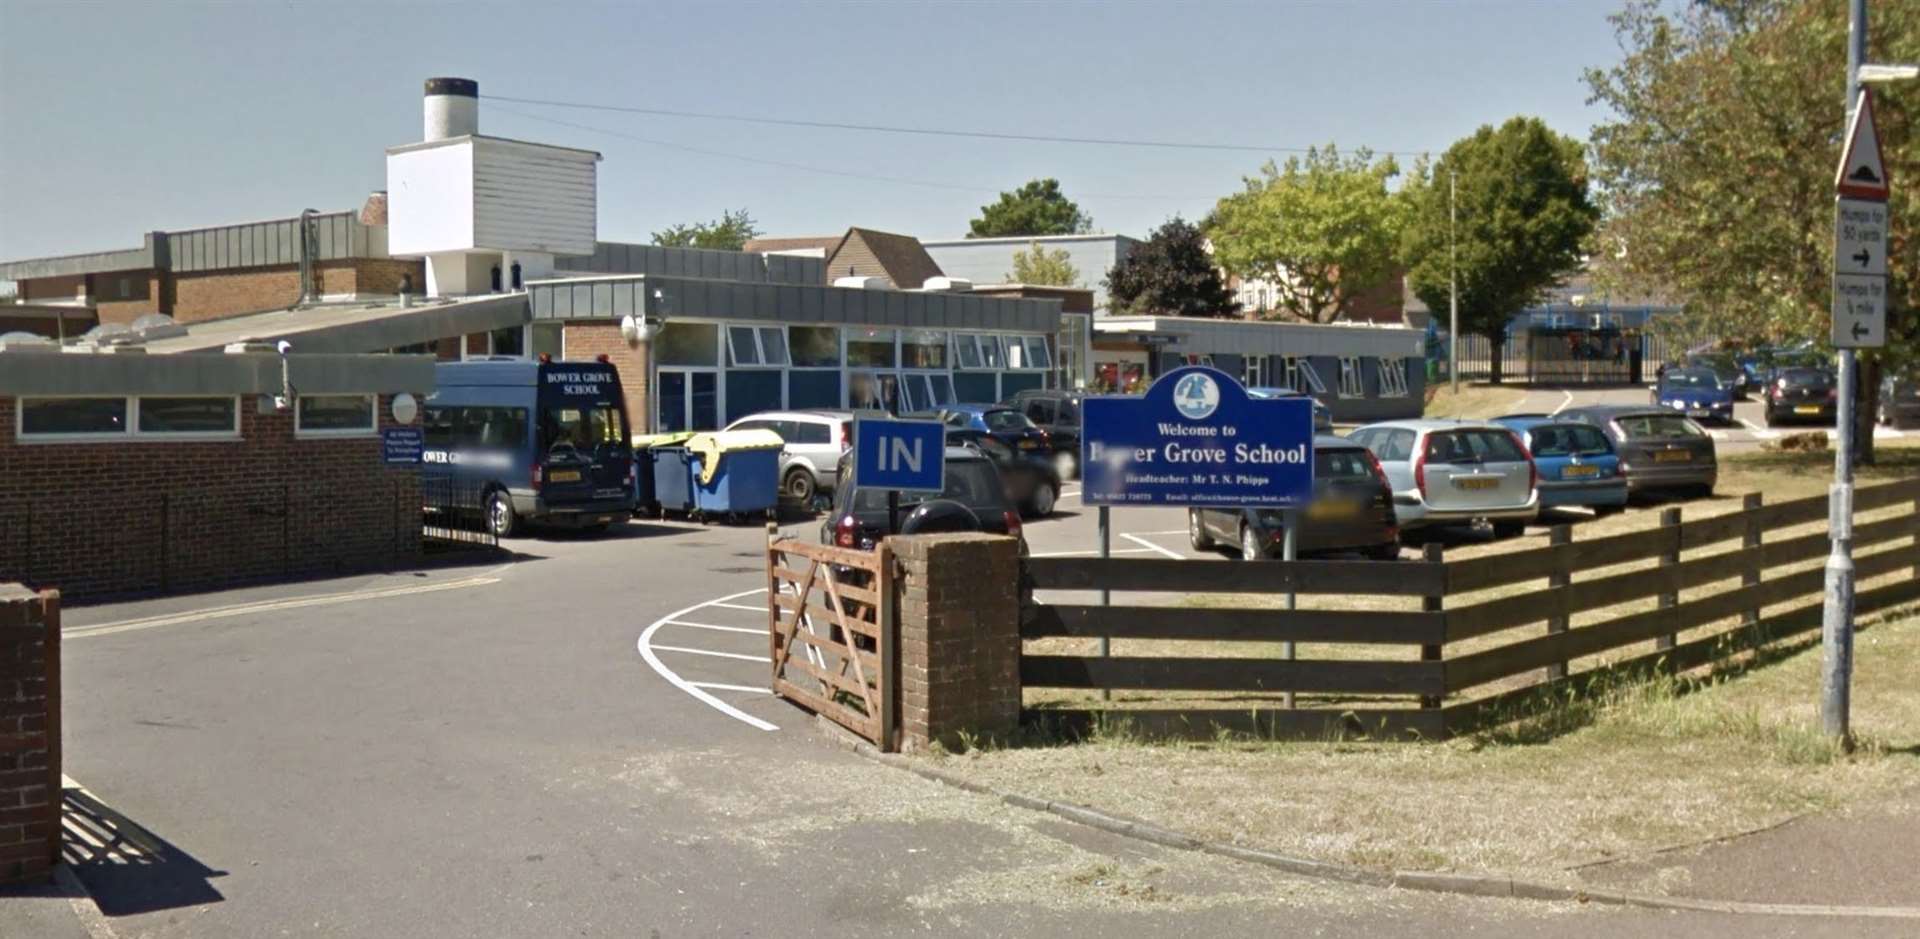 Bower Grove School in Fant Lane. Picture: Google Street View